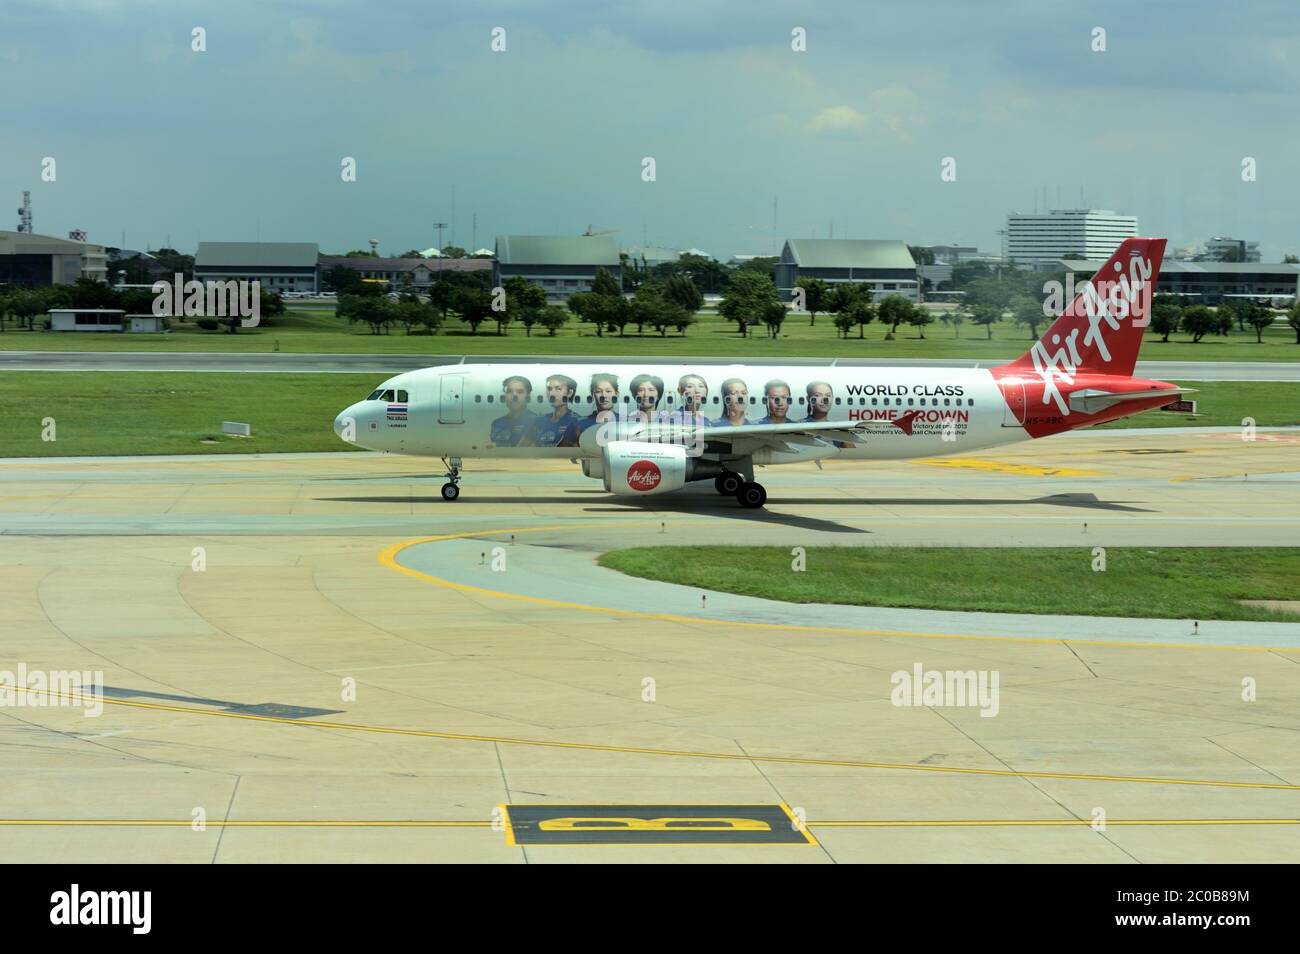 Aircraft on the Runway Stock Photo